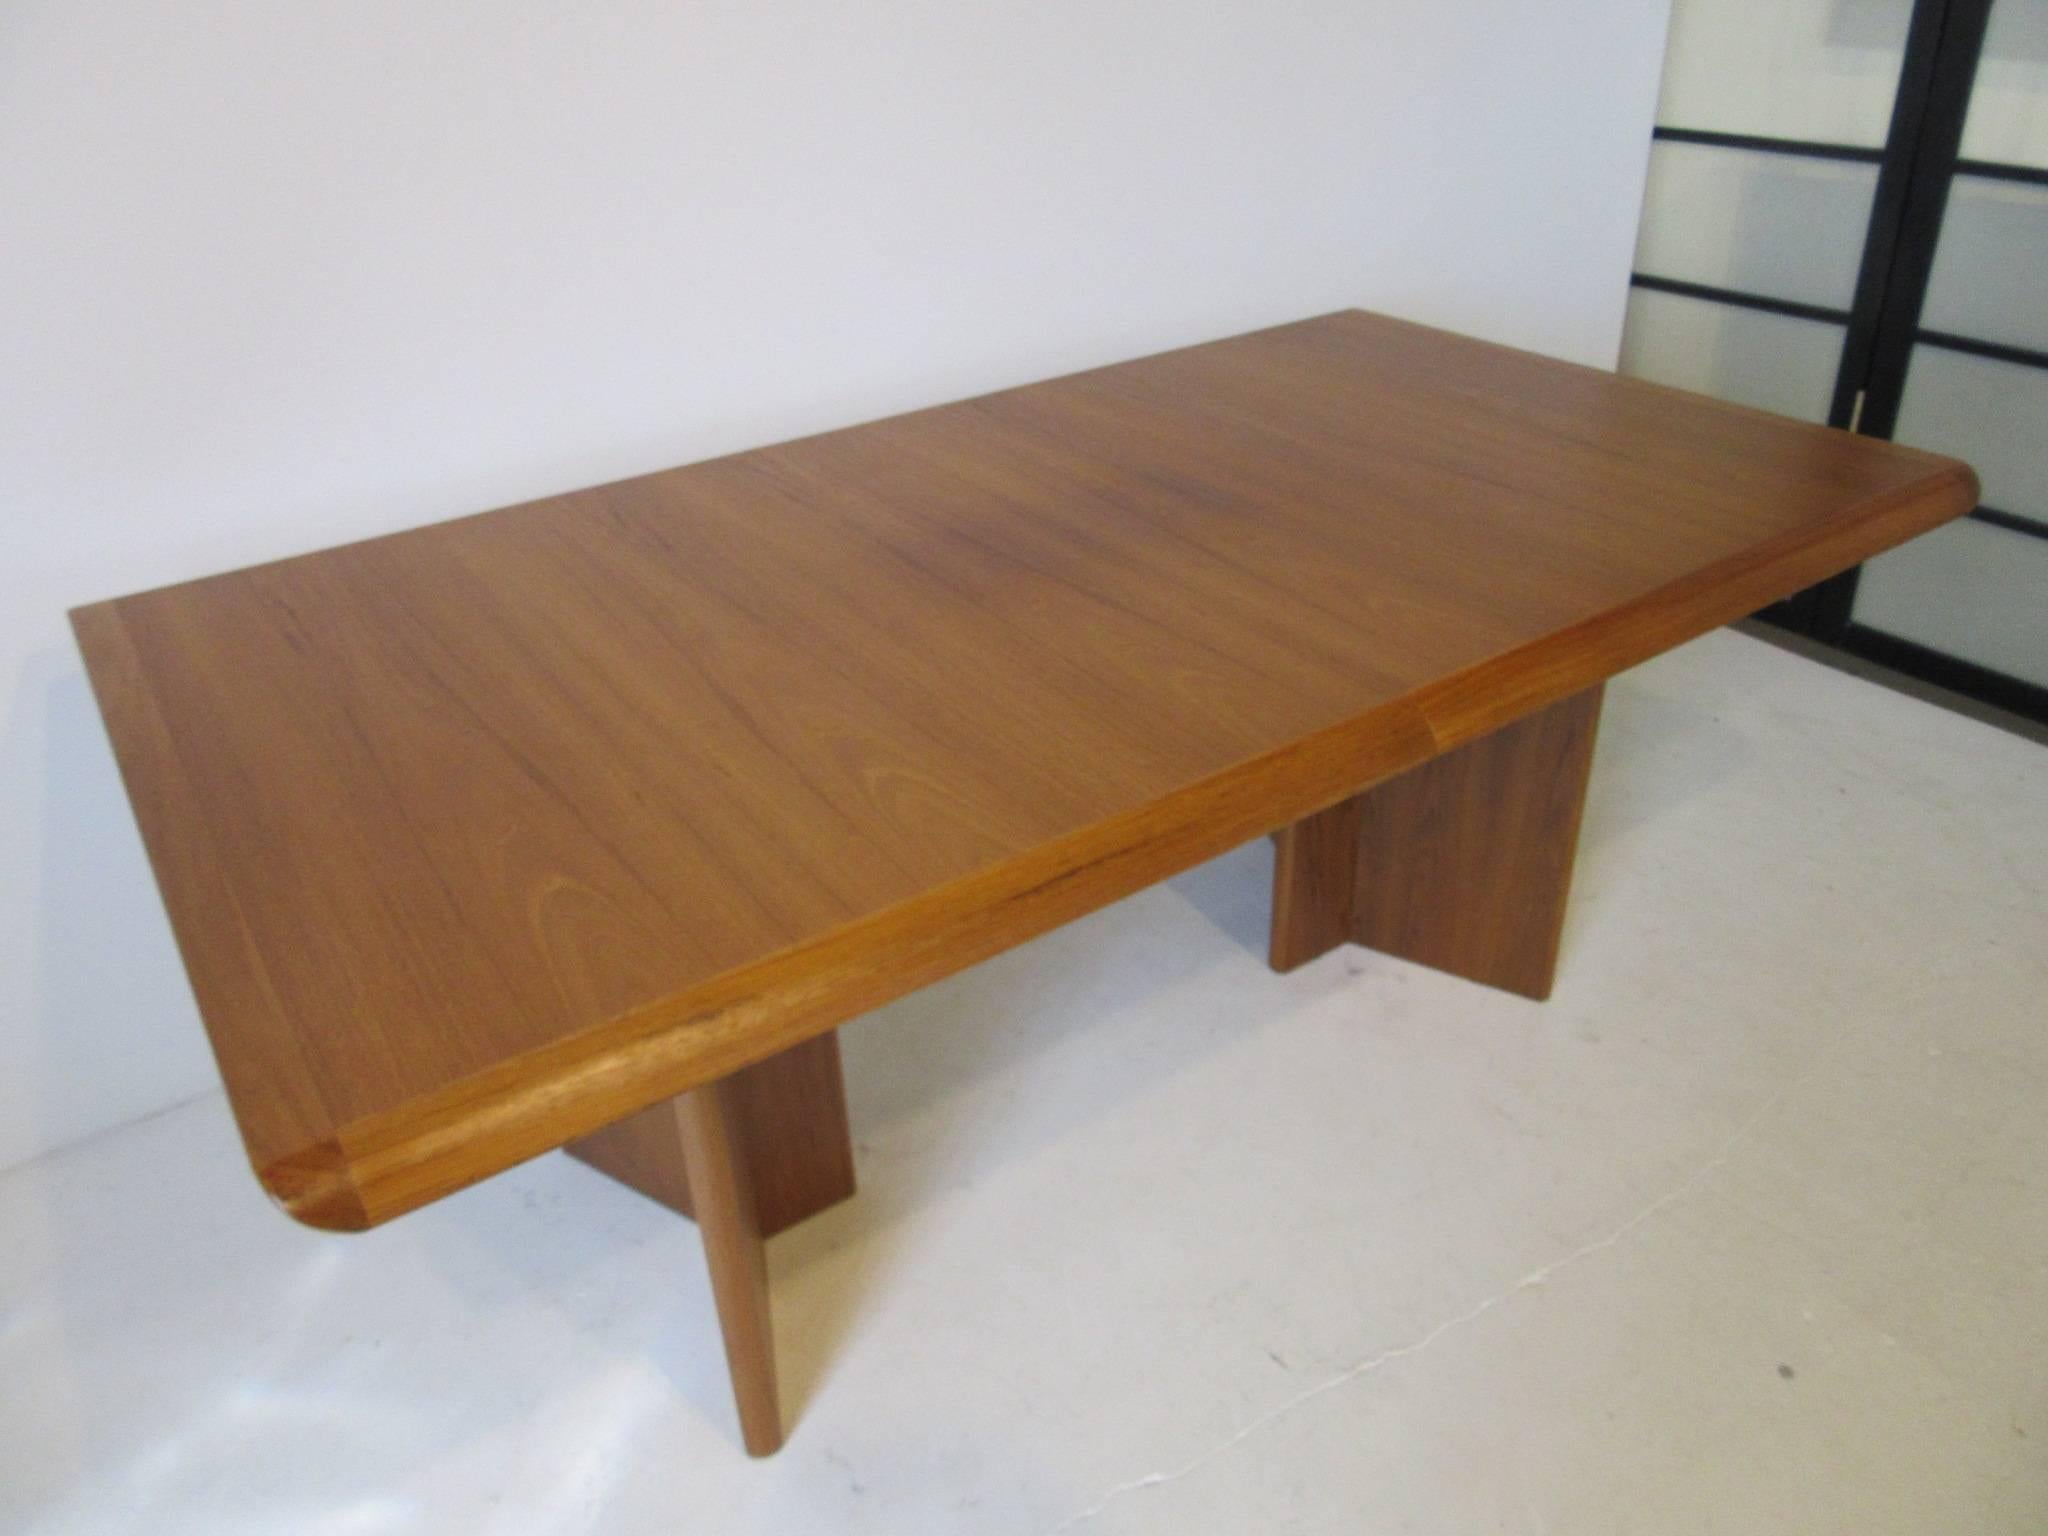 A well made teak wood dining or conference table with two 17.50